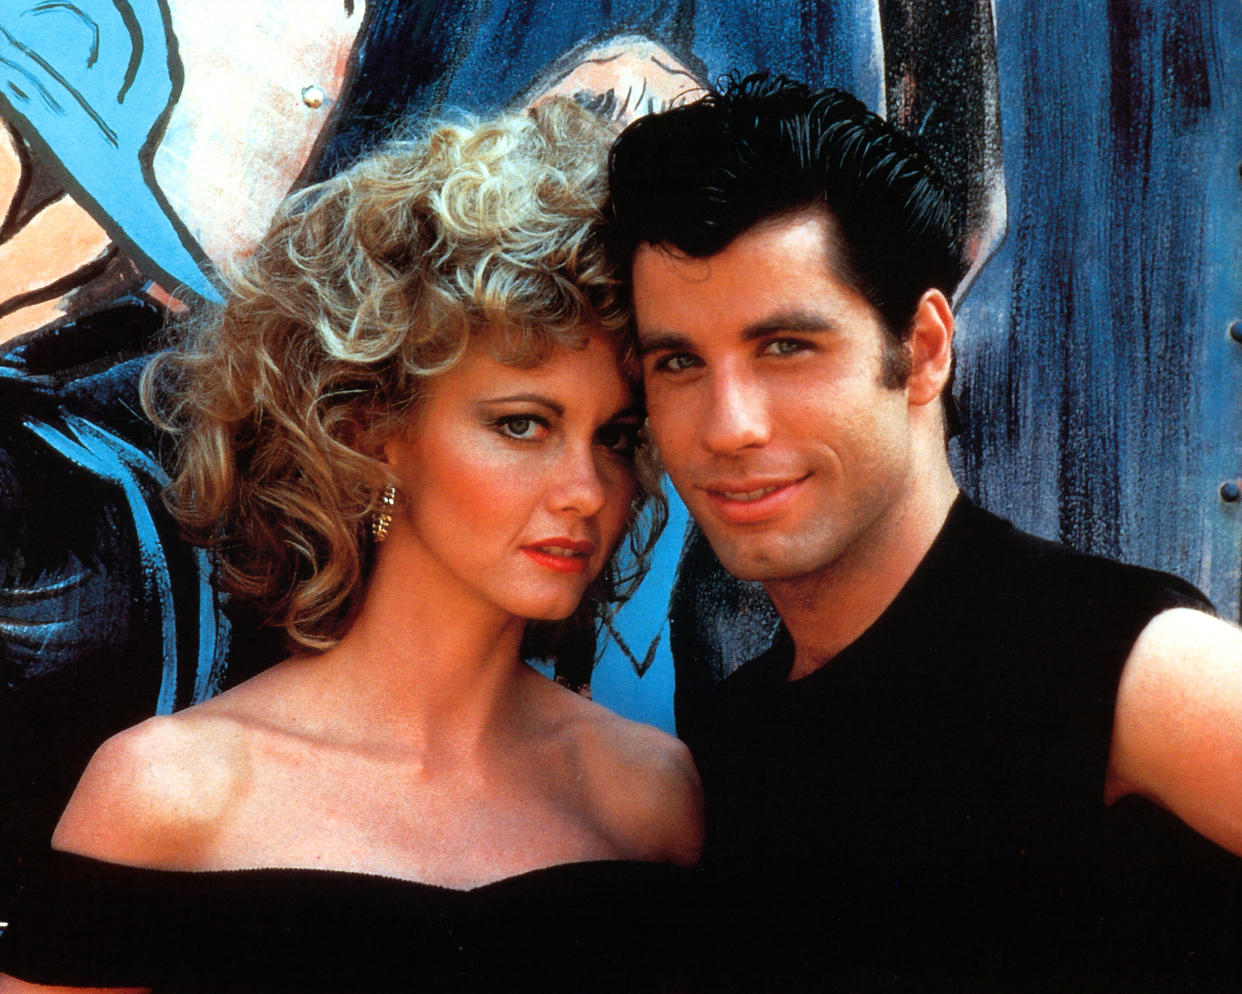 Olivia Newton-John and John Travolta in a scene from the film 'Grease', 1978. (Photo by Paramount/Getty Images)